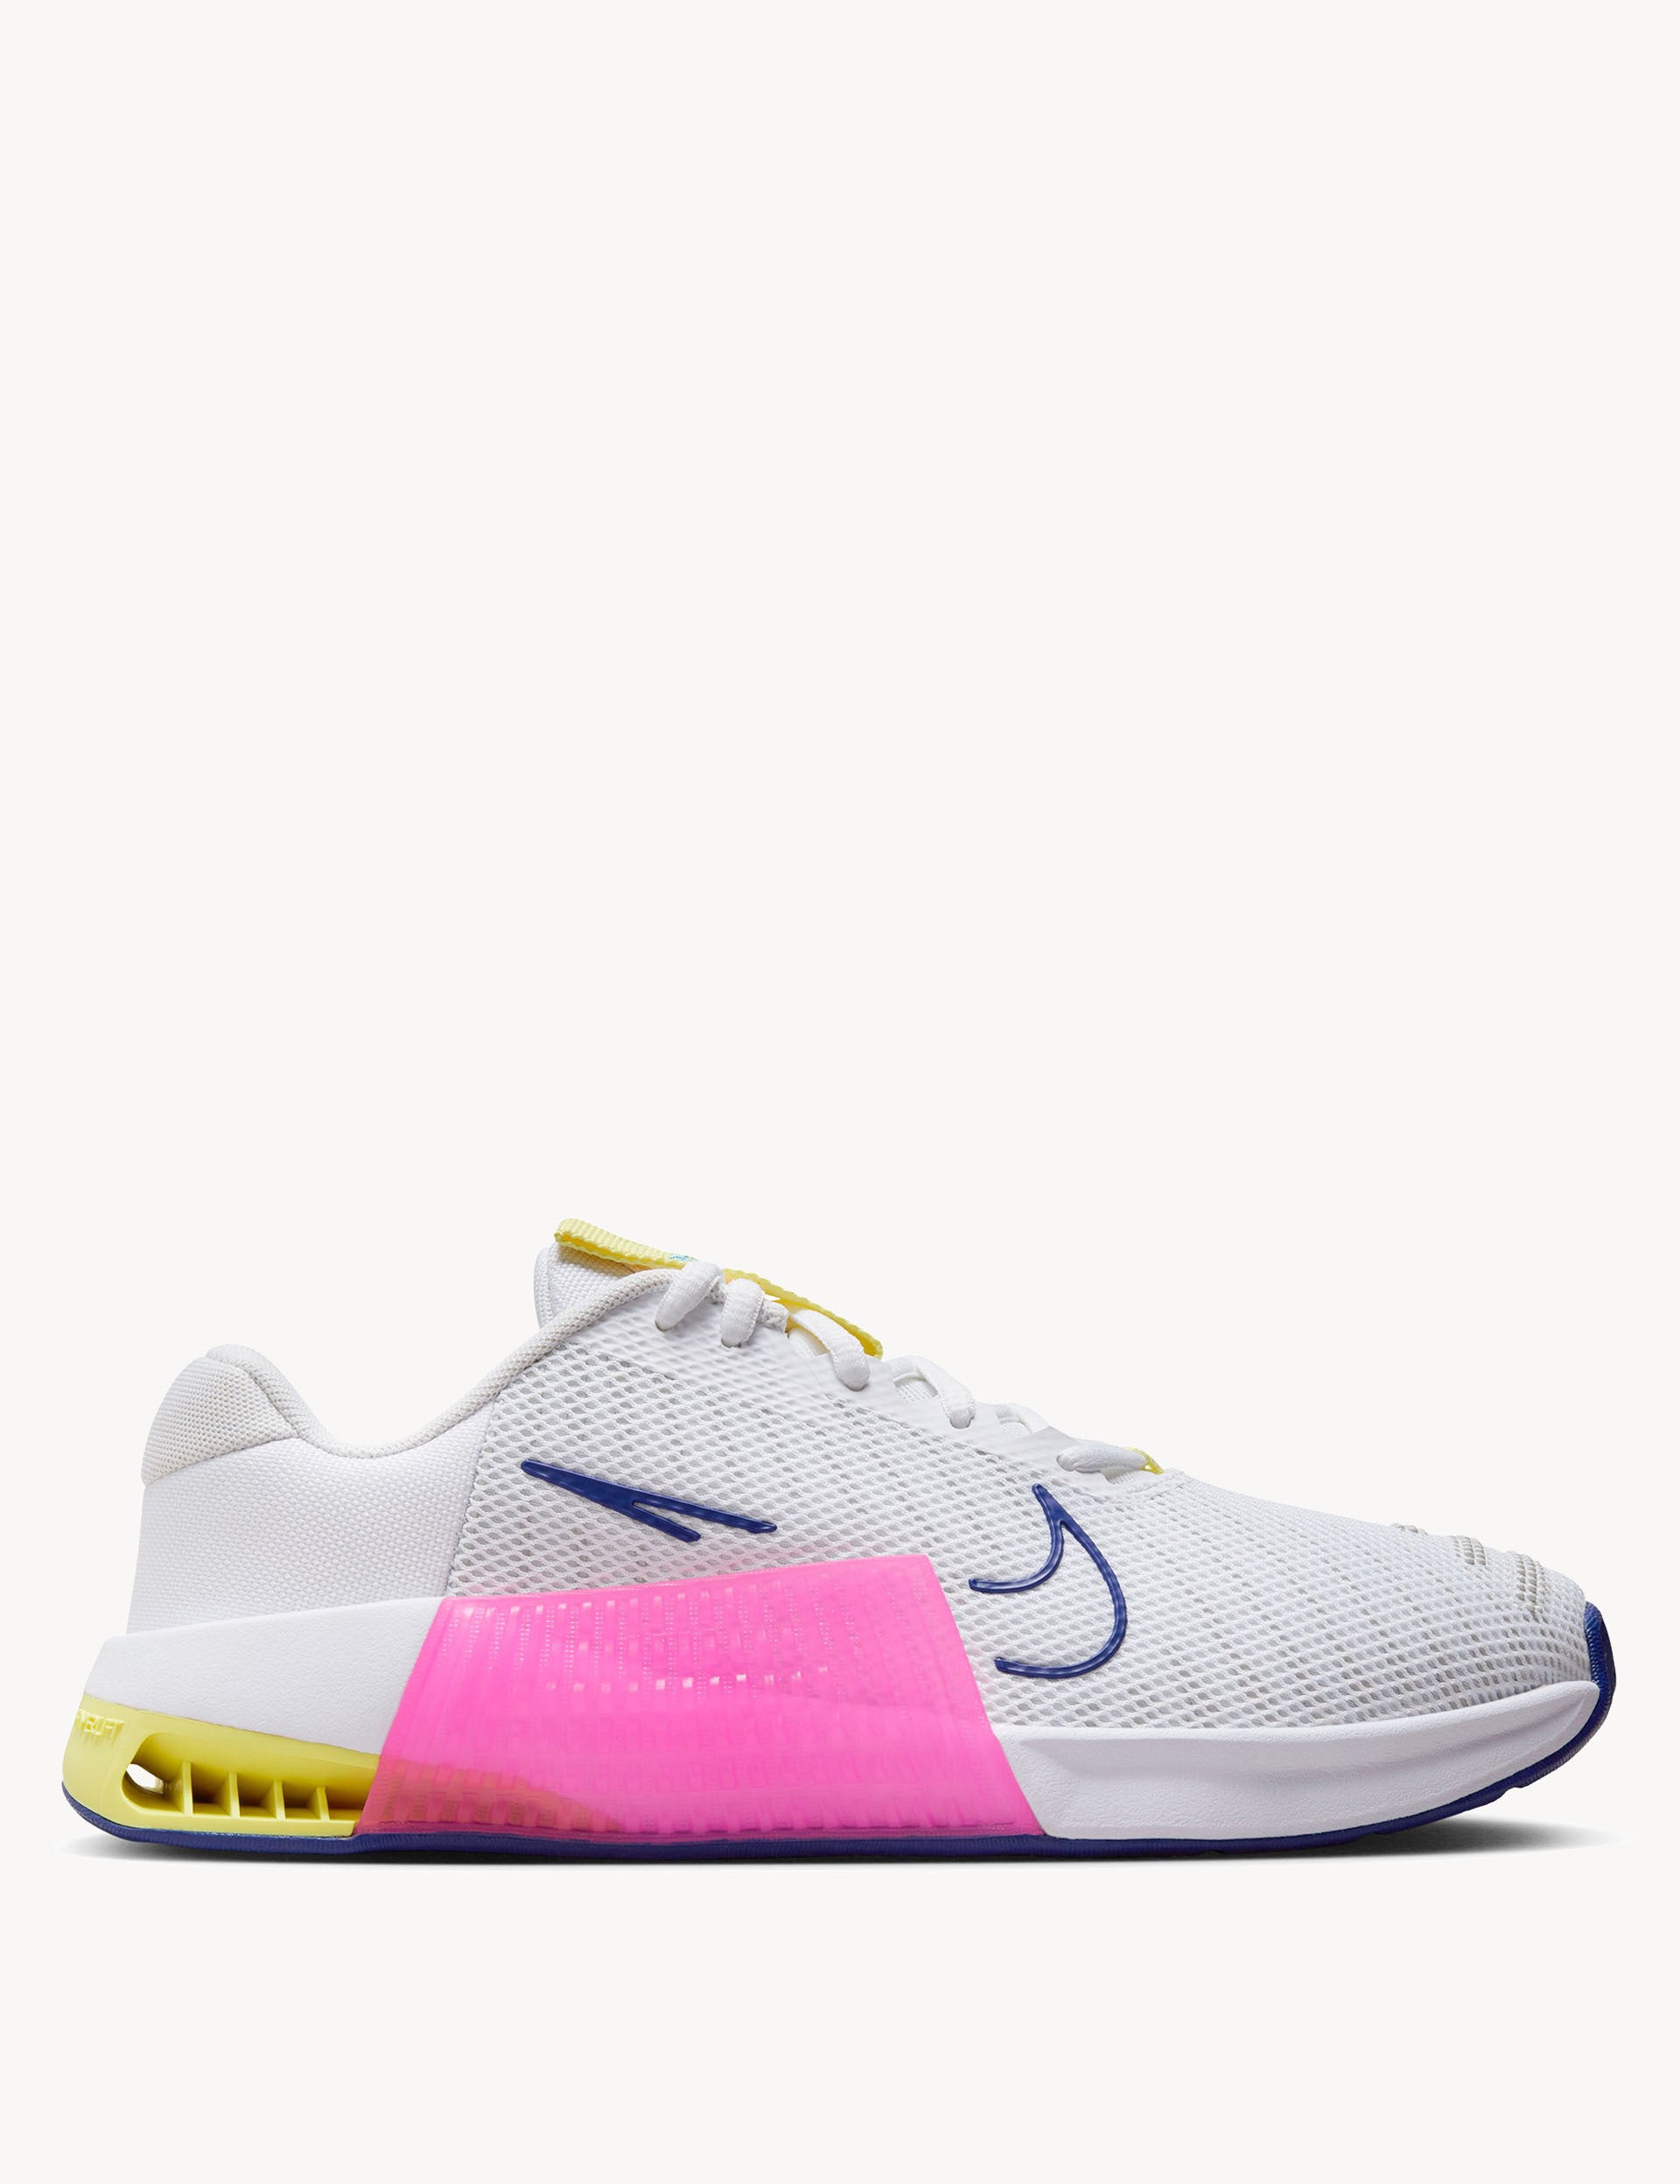 Nike | Metcon 9 Shoes - White/Blue/Pink | The Sports Edit